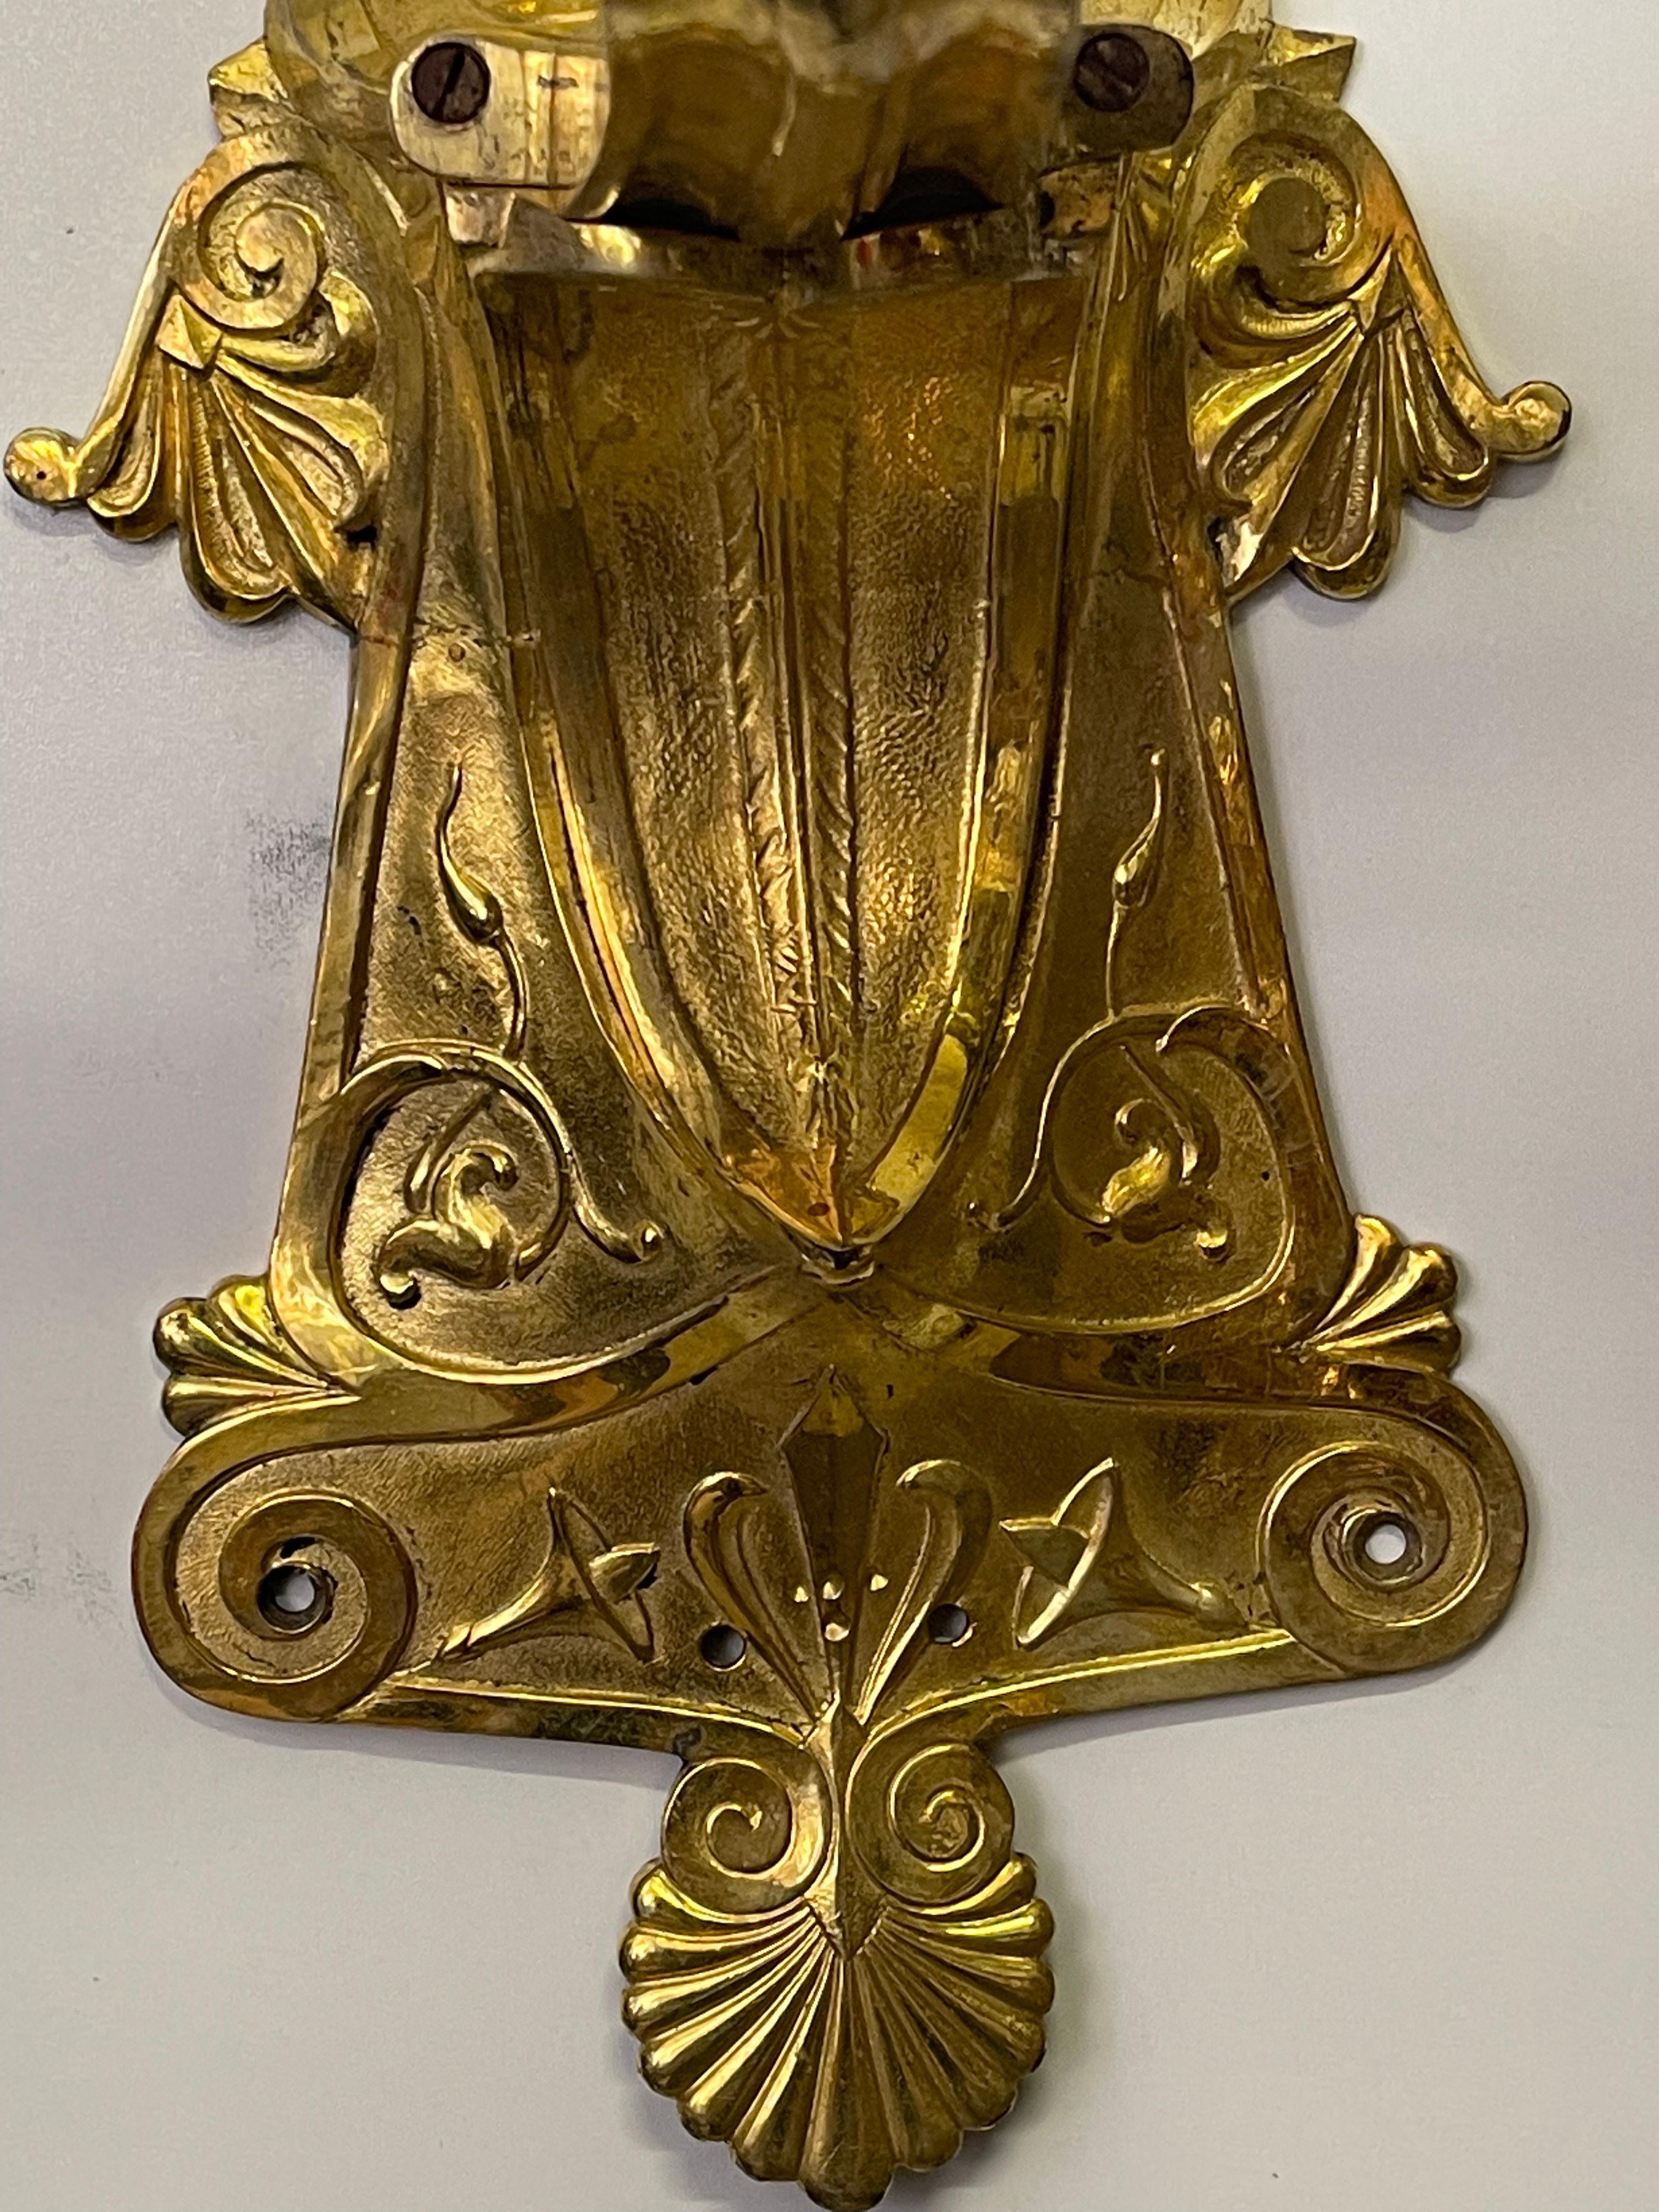 Gilt Pair of Stunning Russian Empire Period Ormolu Wall Sconces , ca. 1820s For Sale